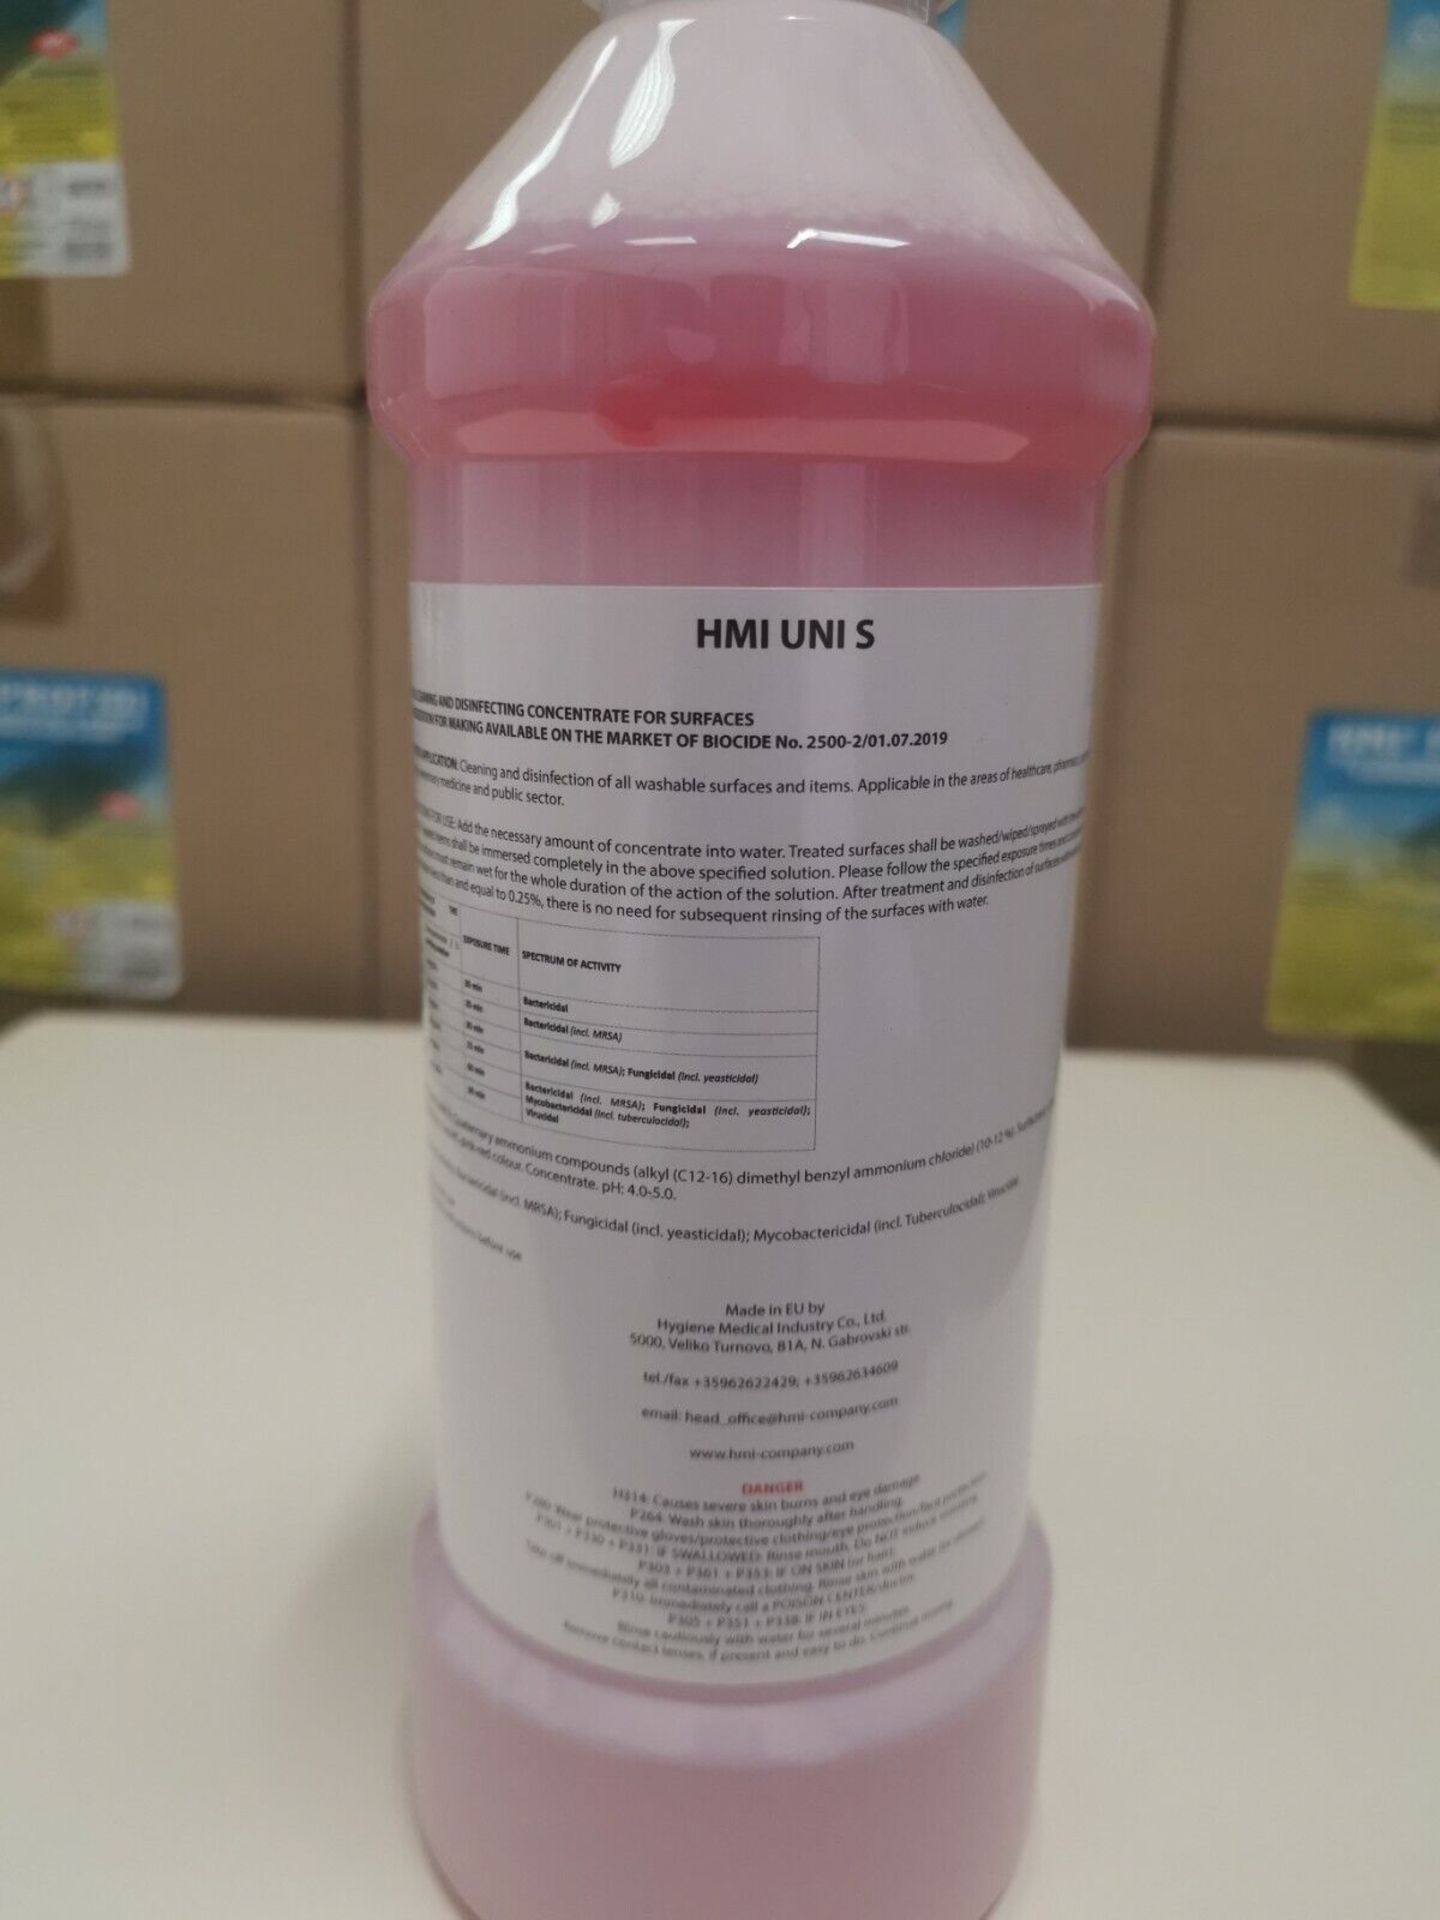 20 x UNI S Liquid Disinfectant Cleaning Concentrate For Surfaces - 1 kg - Image 2 of 6